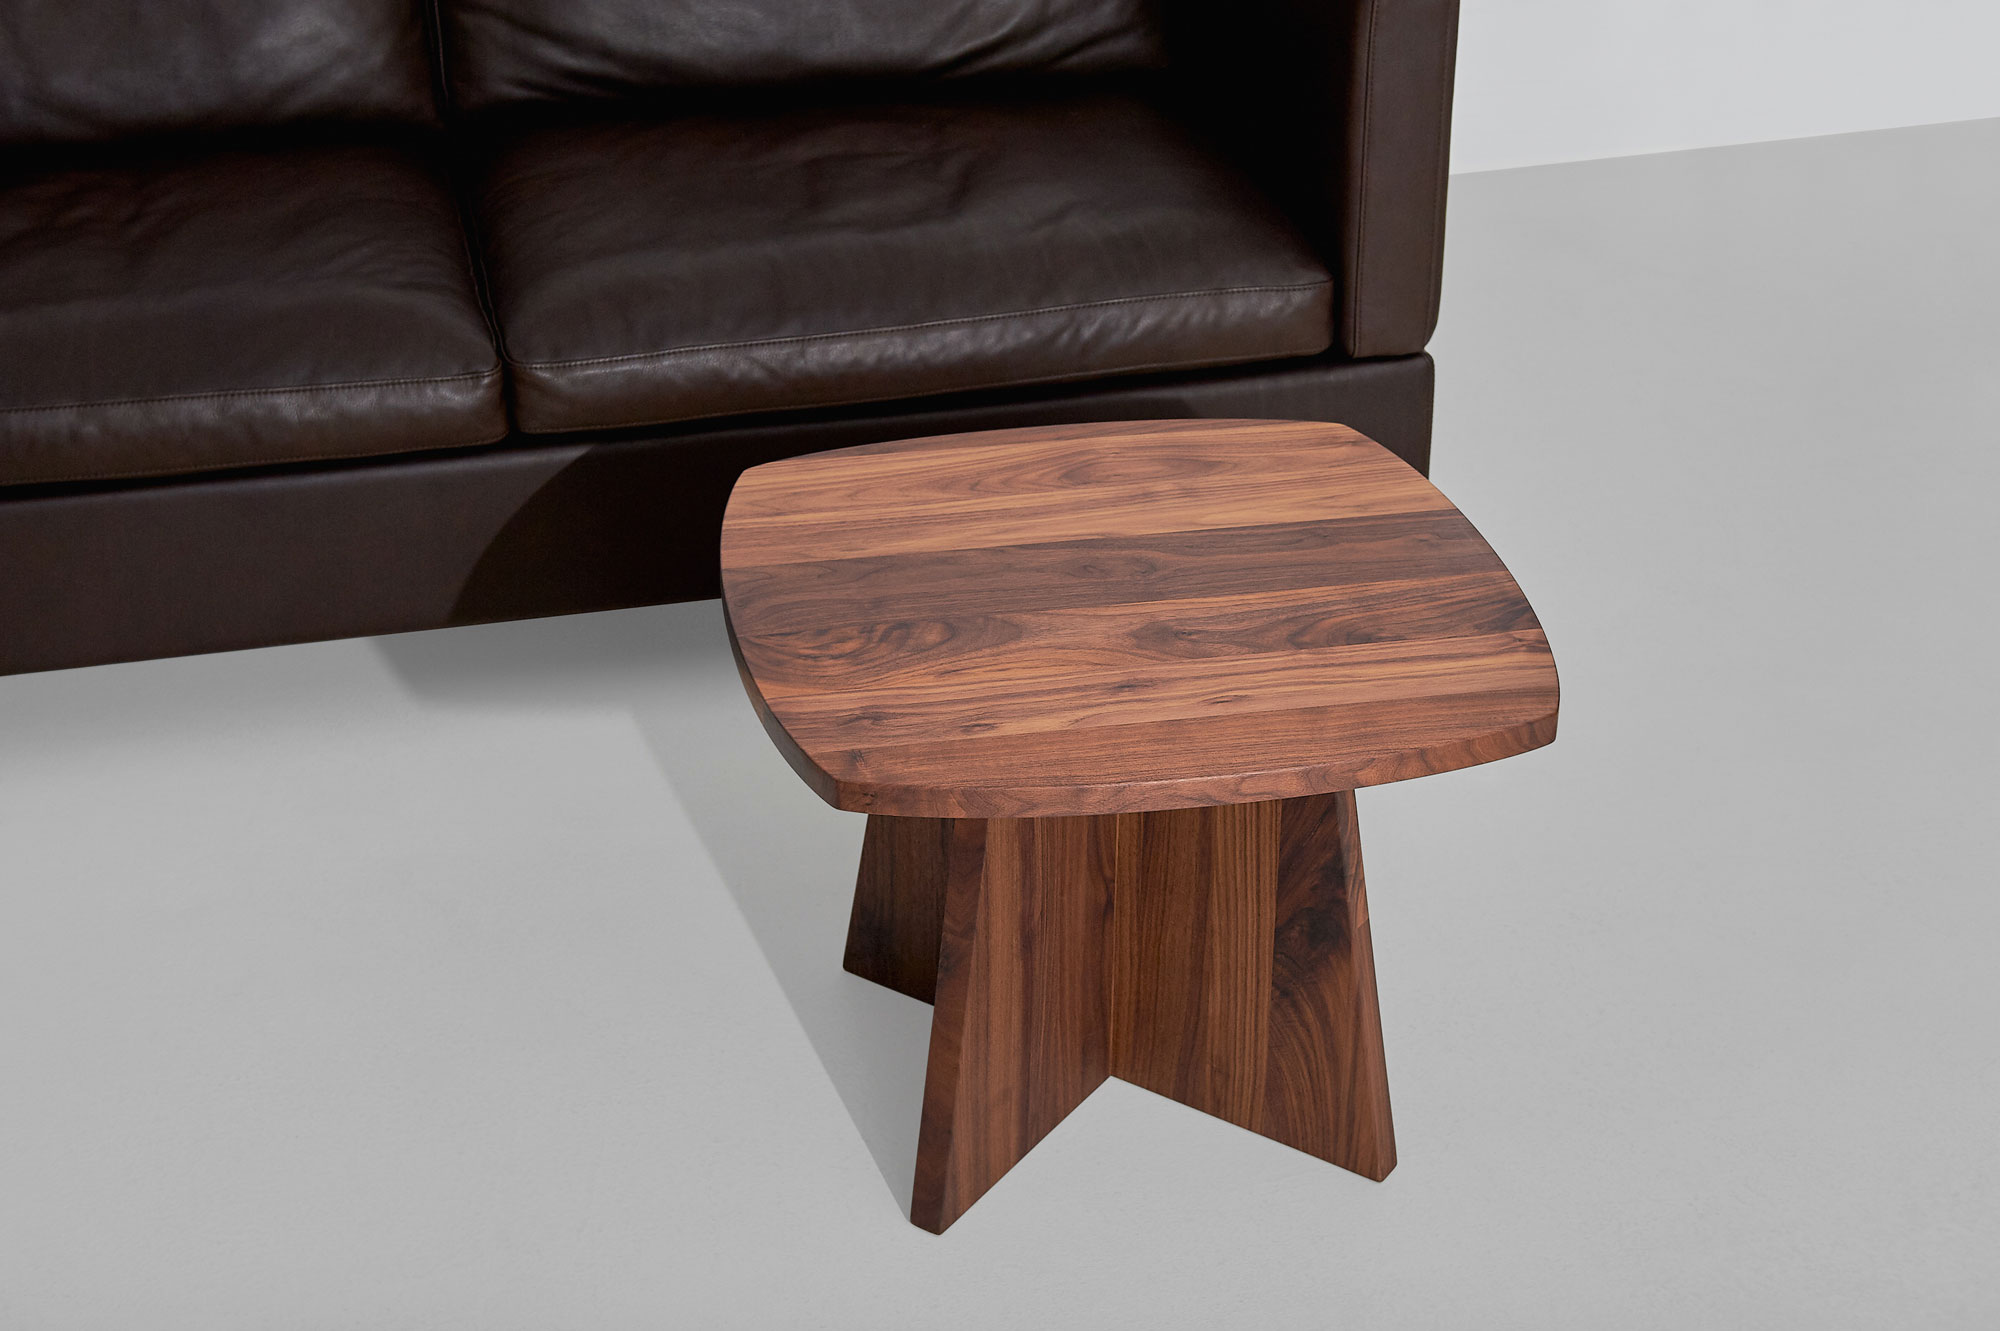  Coffee table LOTUS X Edited custom made in solid wood by vitamin design